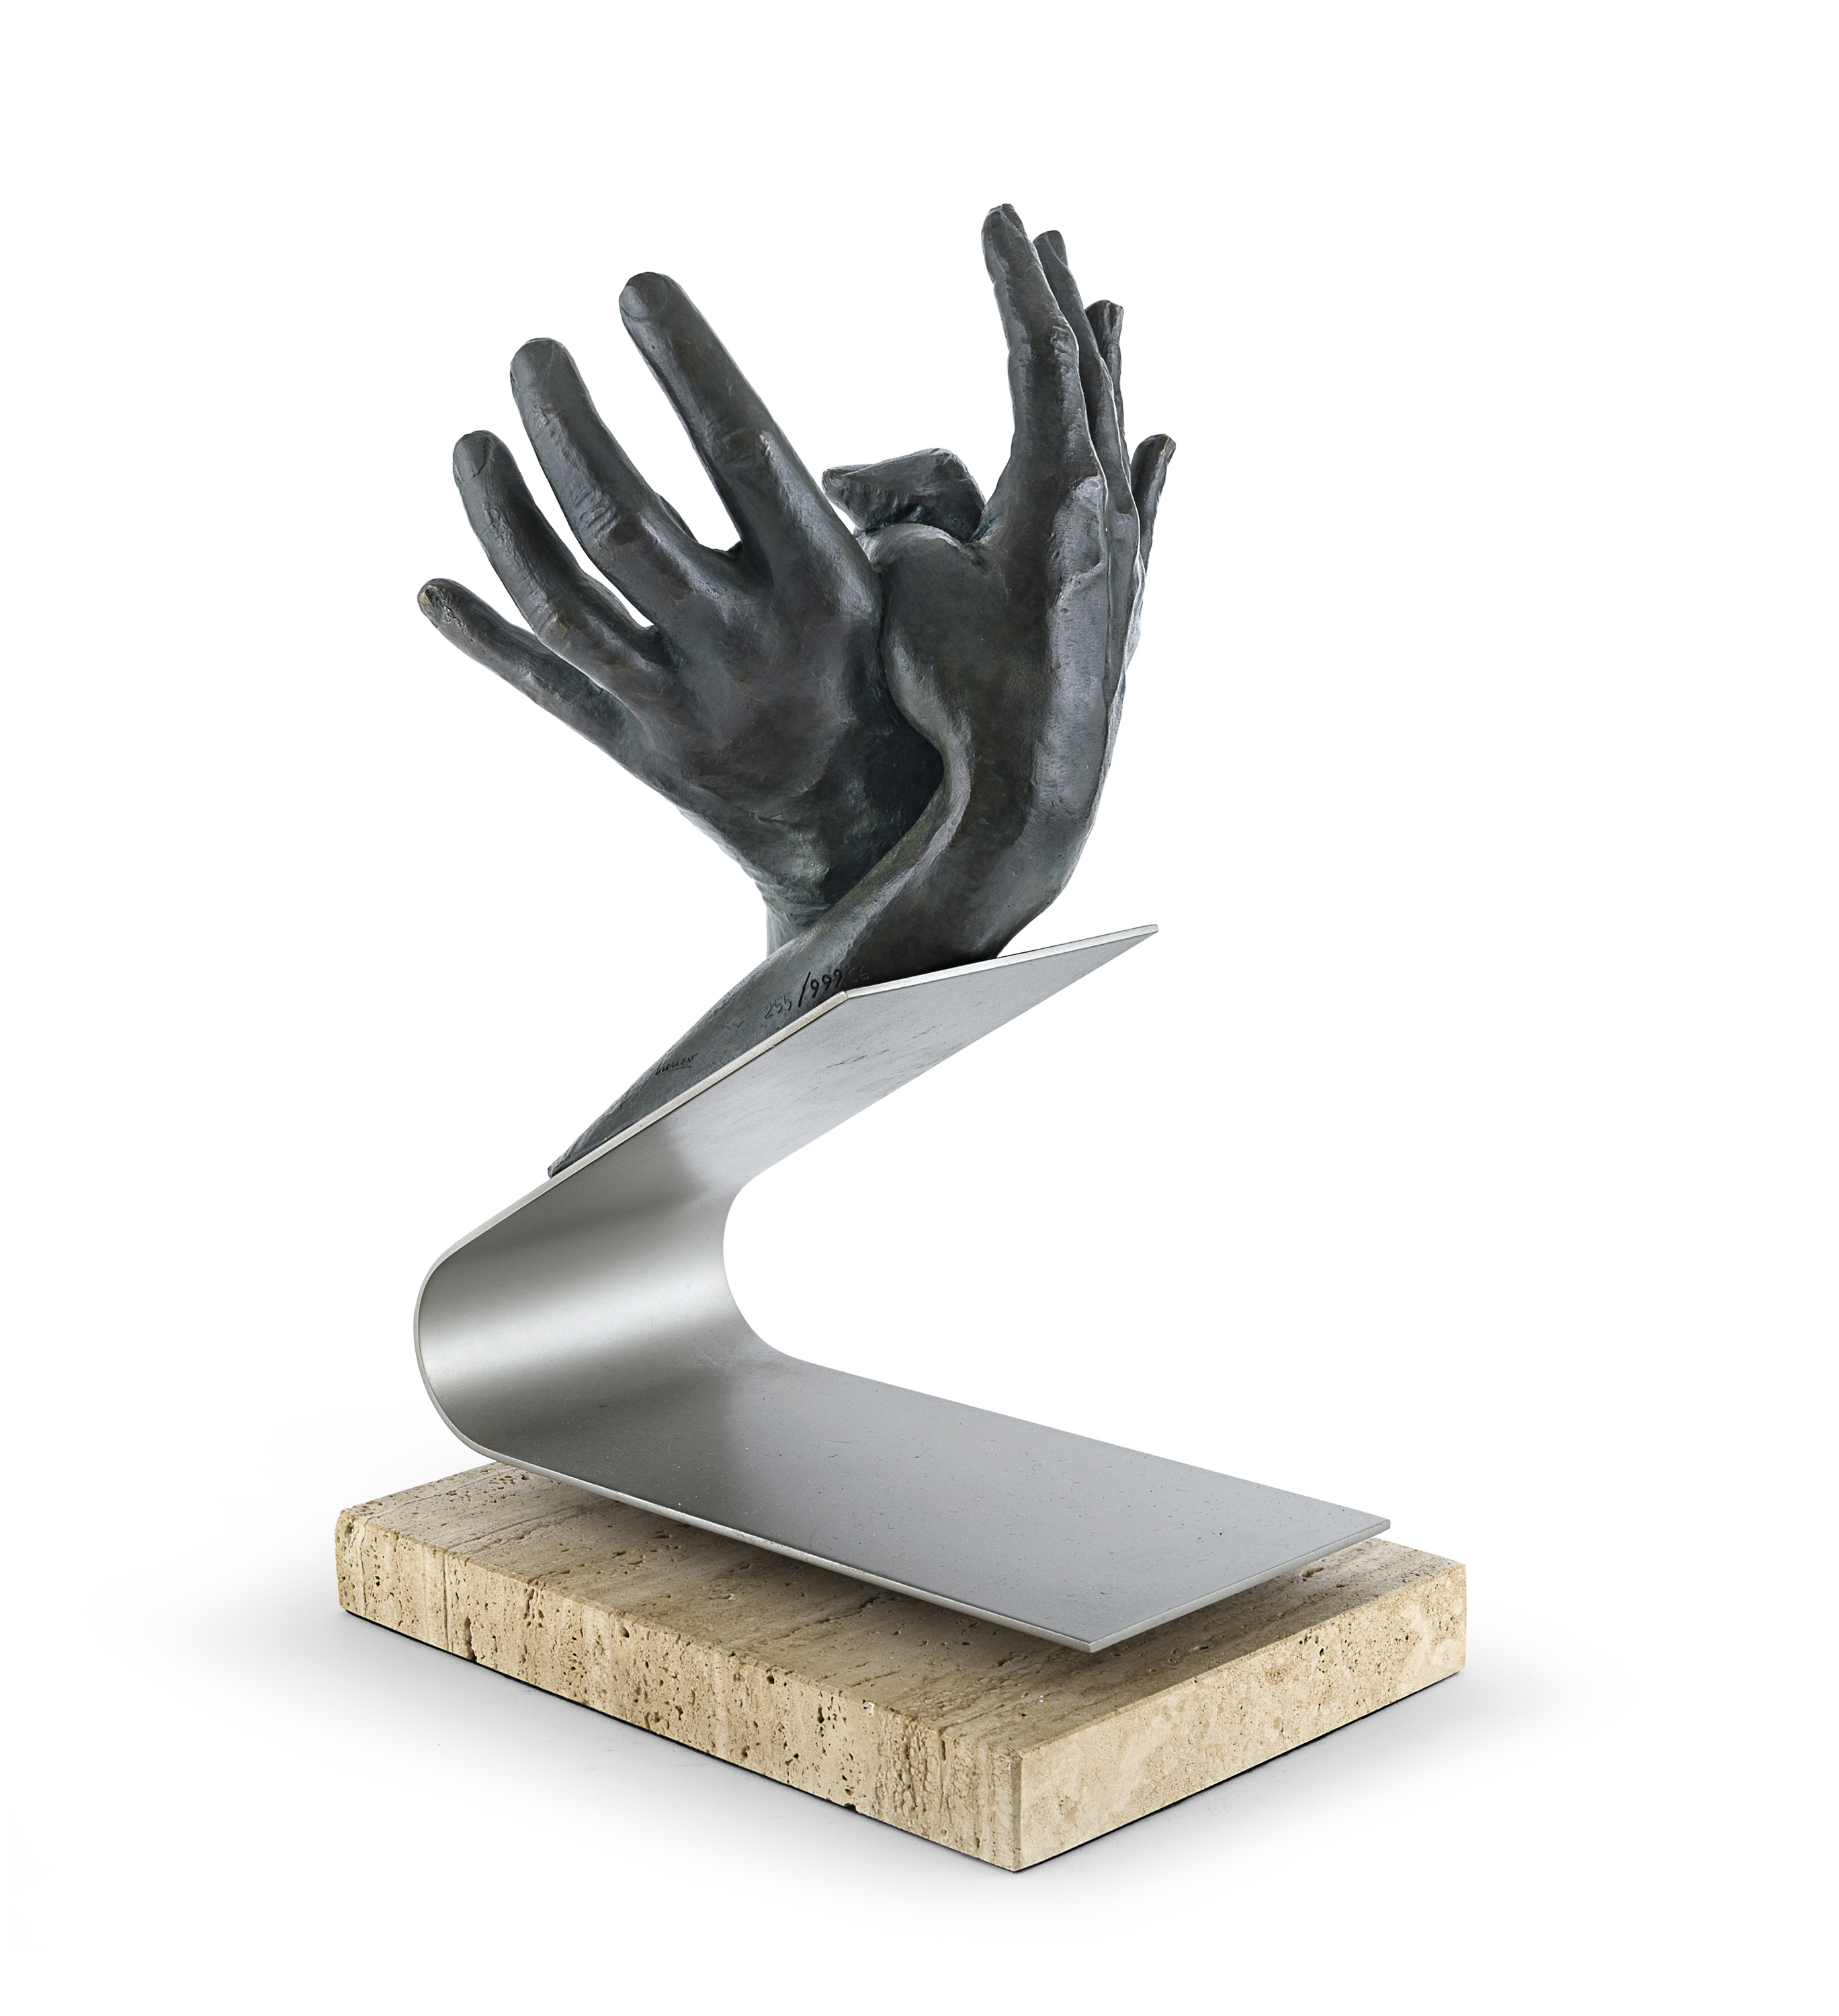 BRONZE-PLATED RESIN SCULPTURE 'WITH YOU' BY LORENZO QUINN - Image 3 of 4